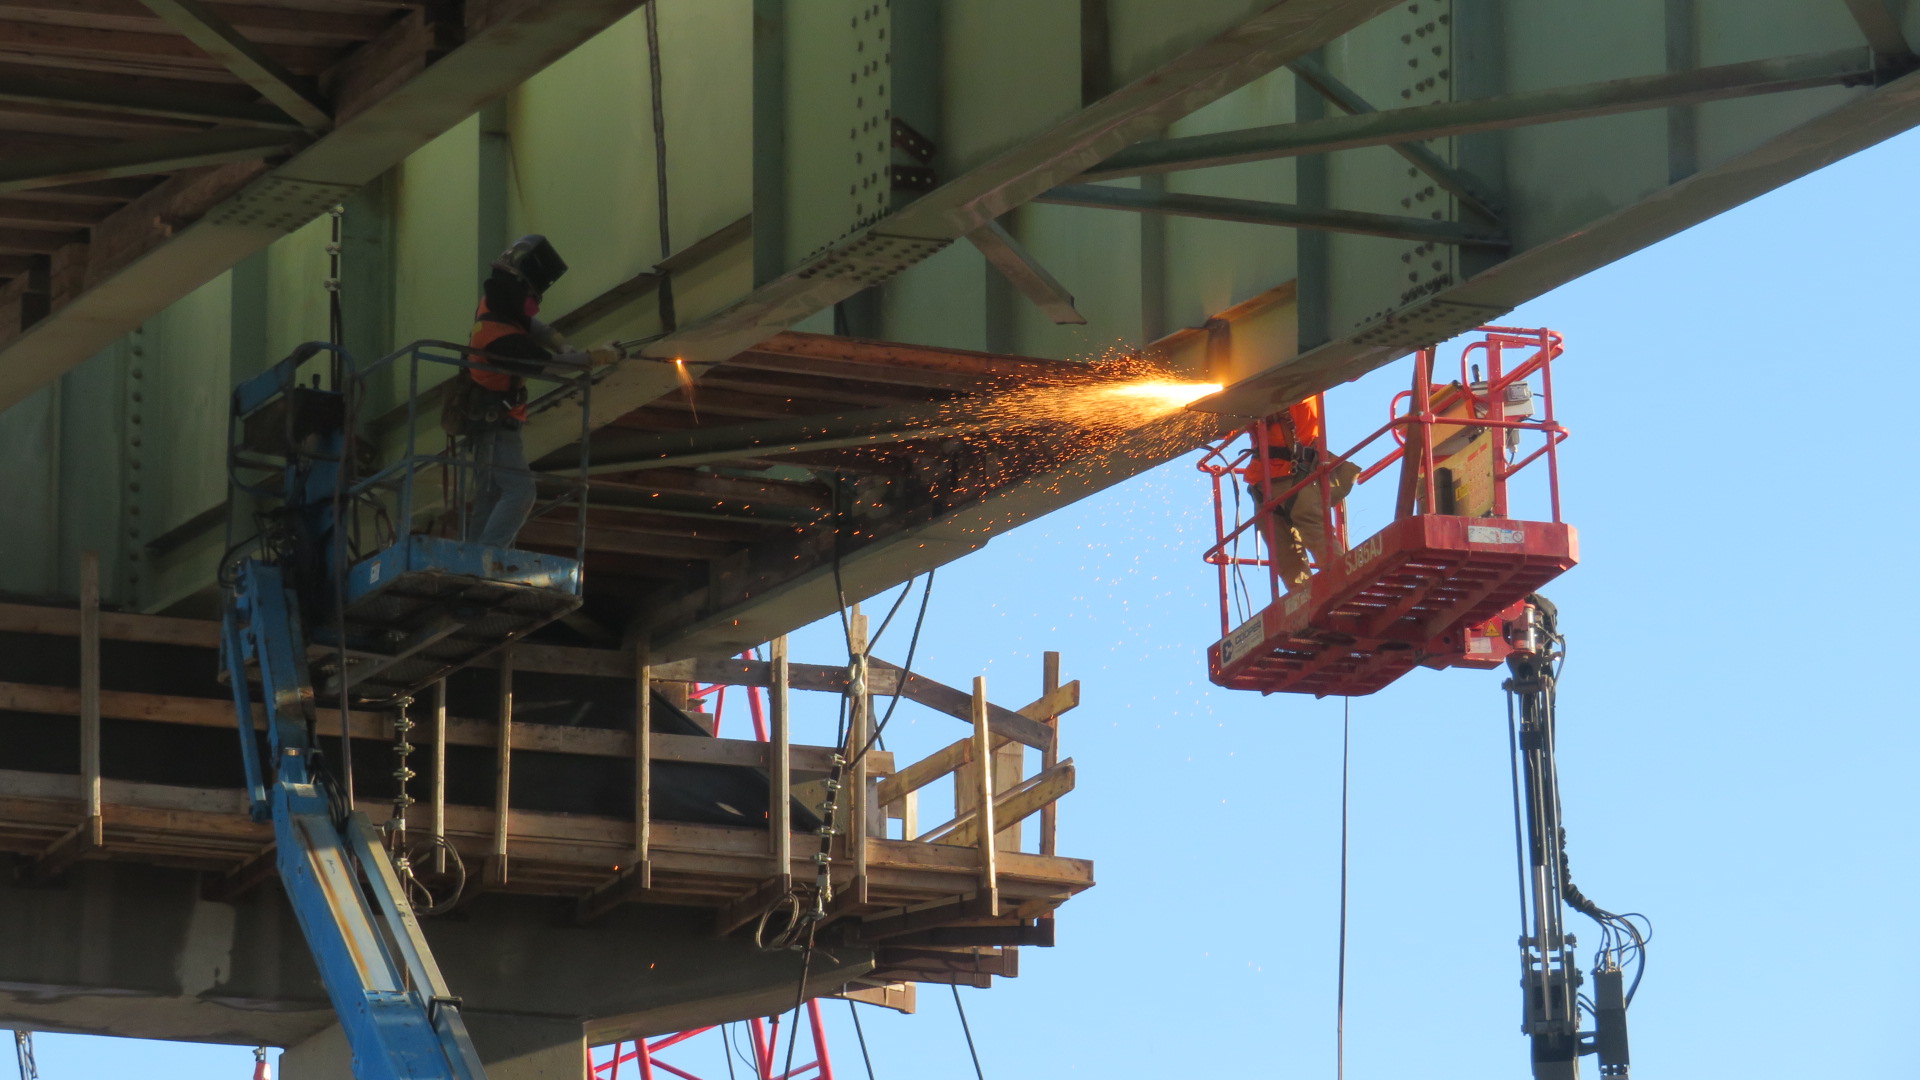 Starting to torch cut the drop-in girder for removal